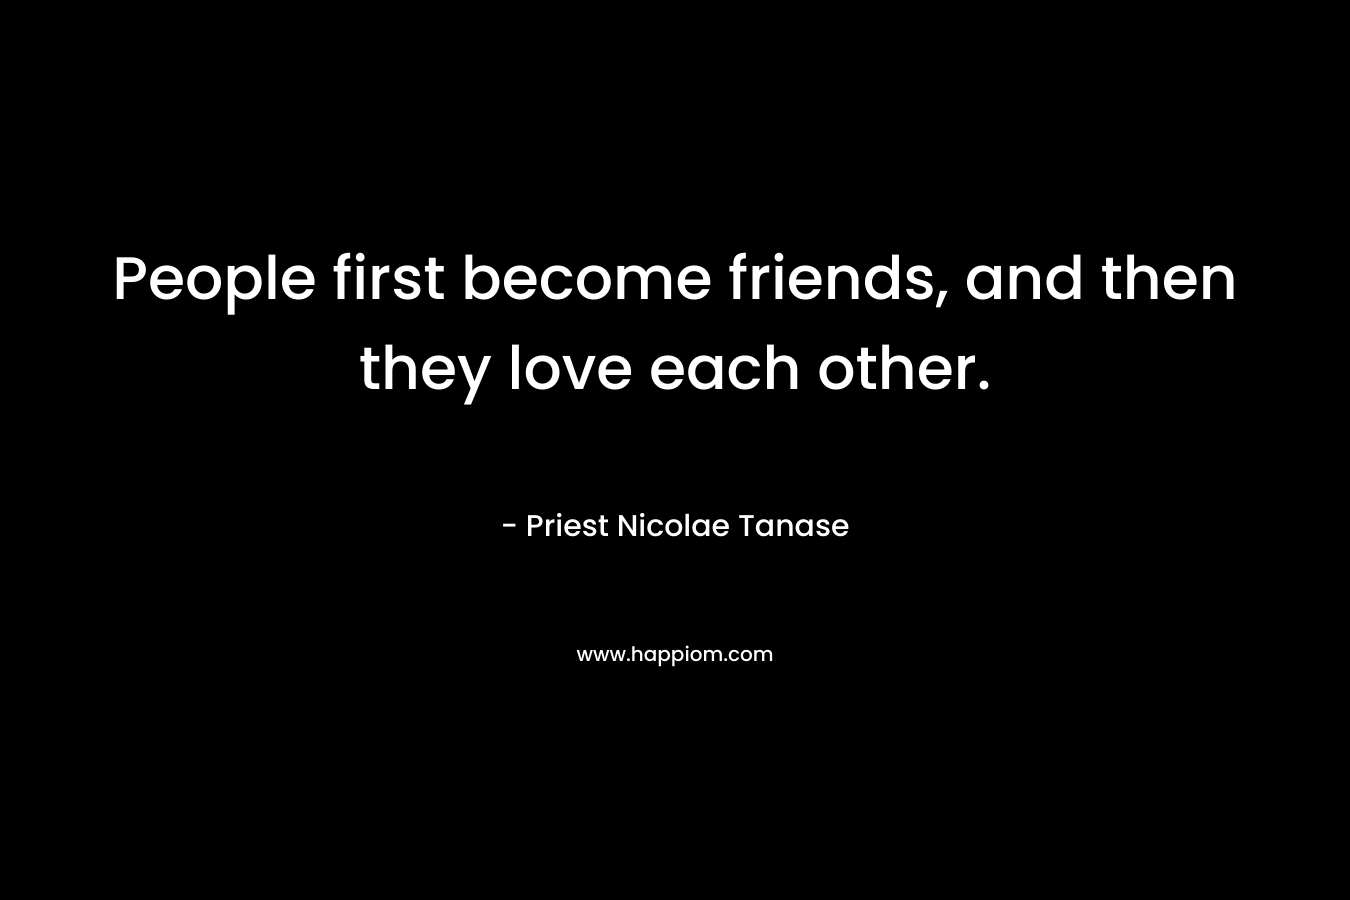 People first become friends, and then they love each other.